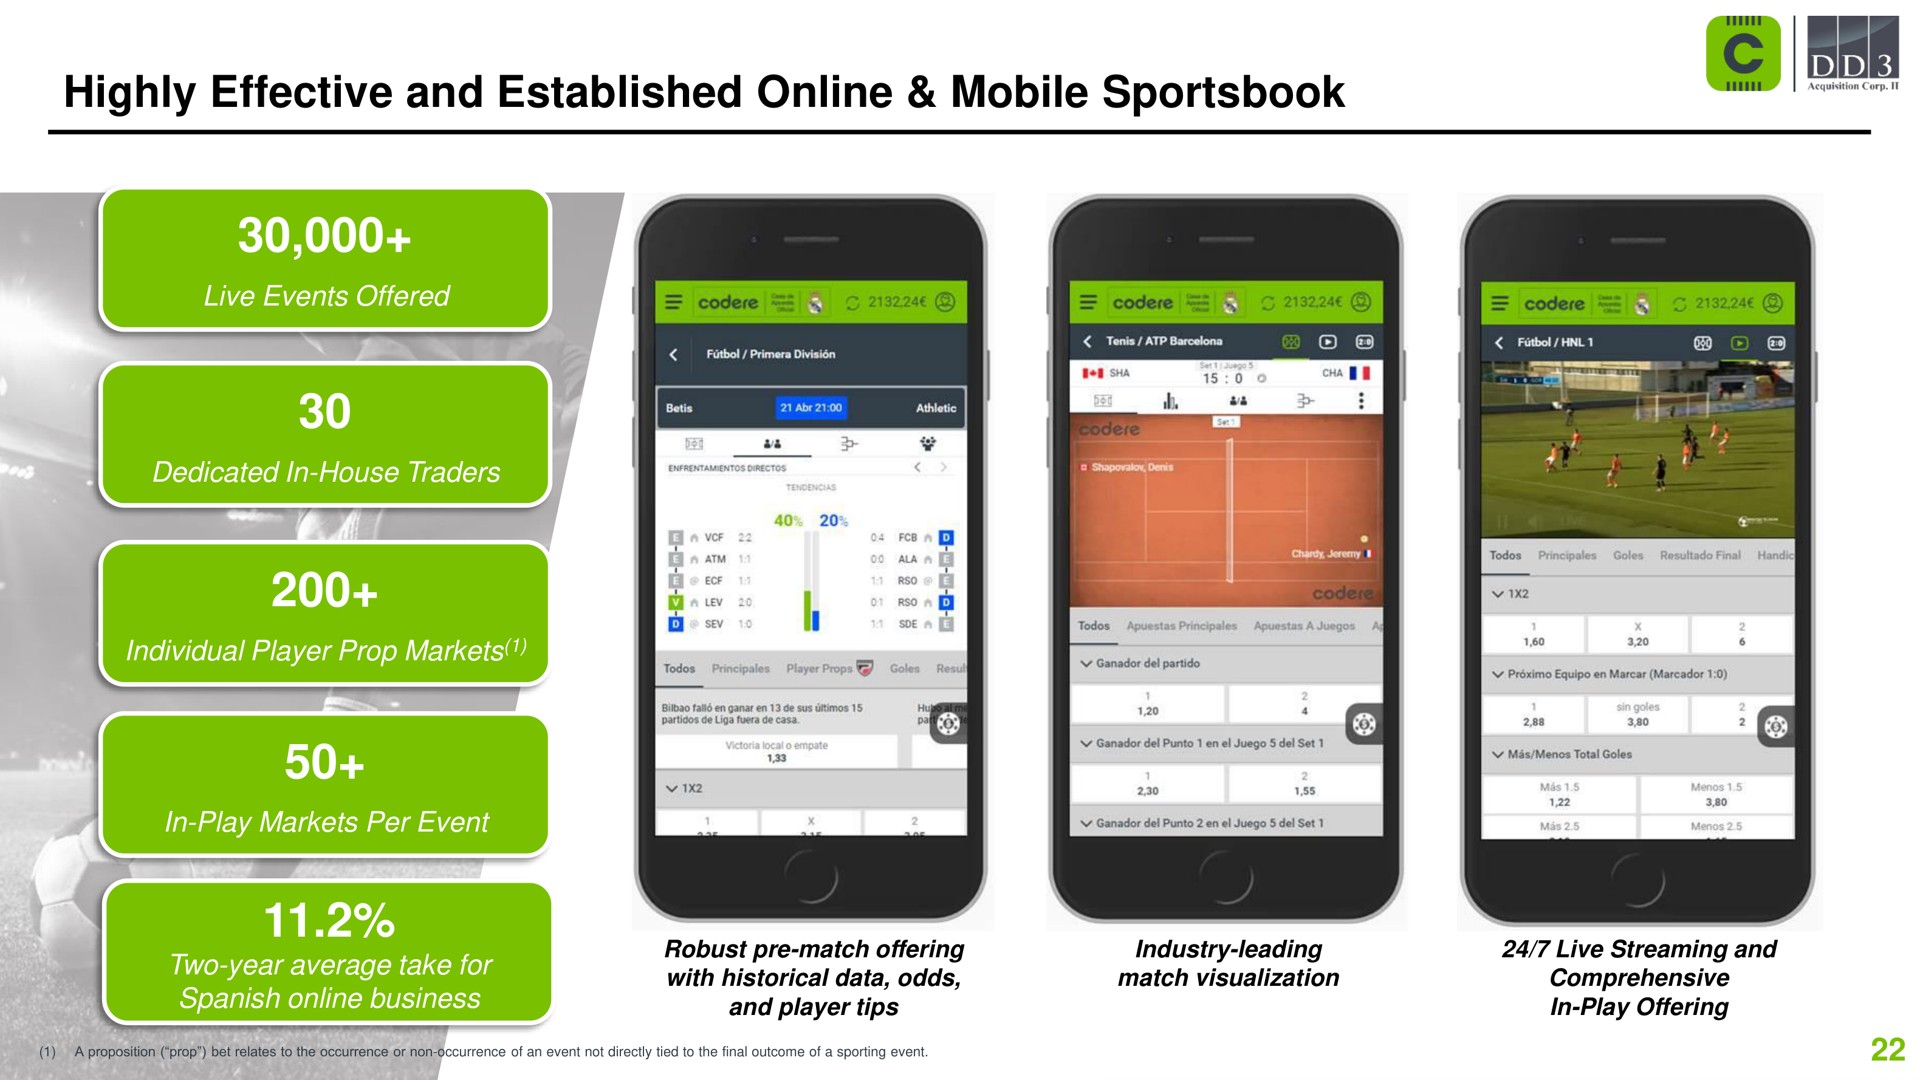 highly effective and established mobile | Codere